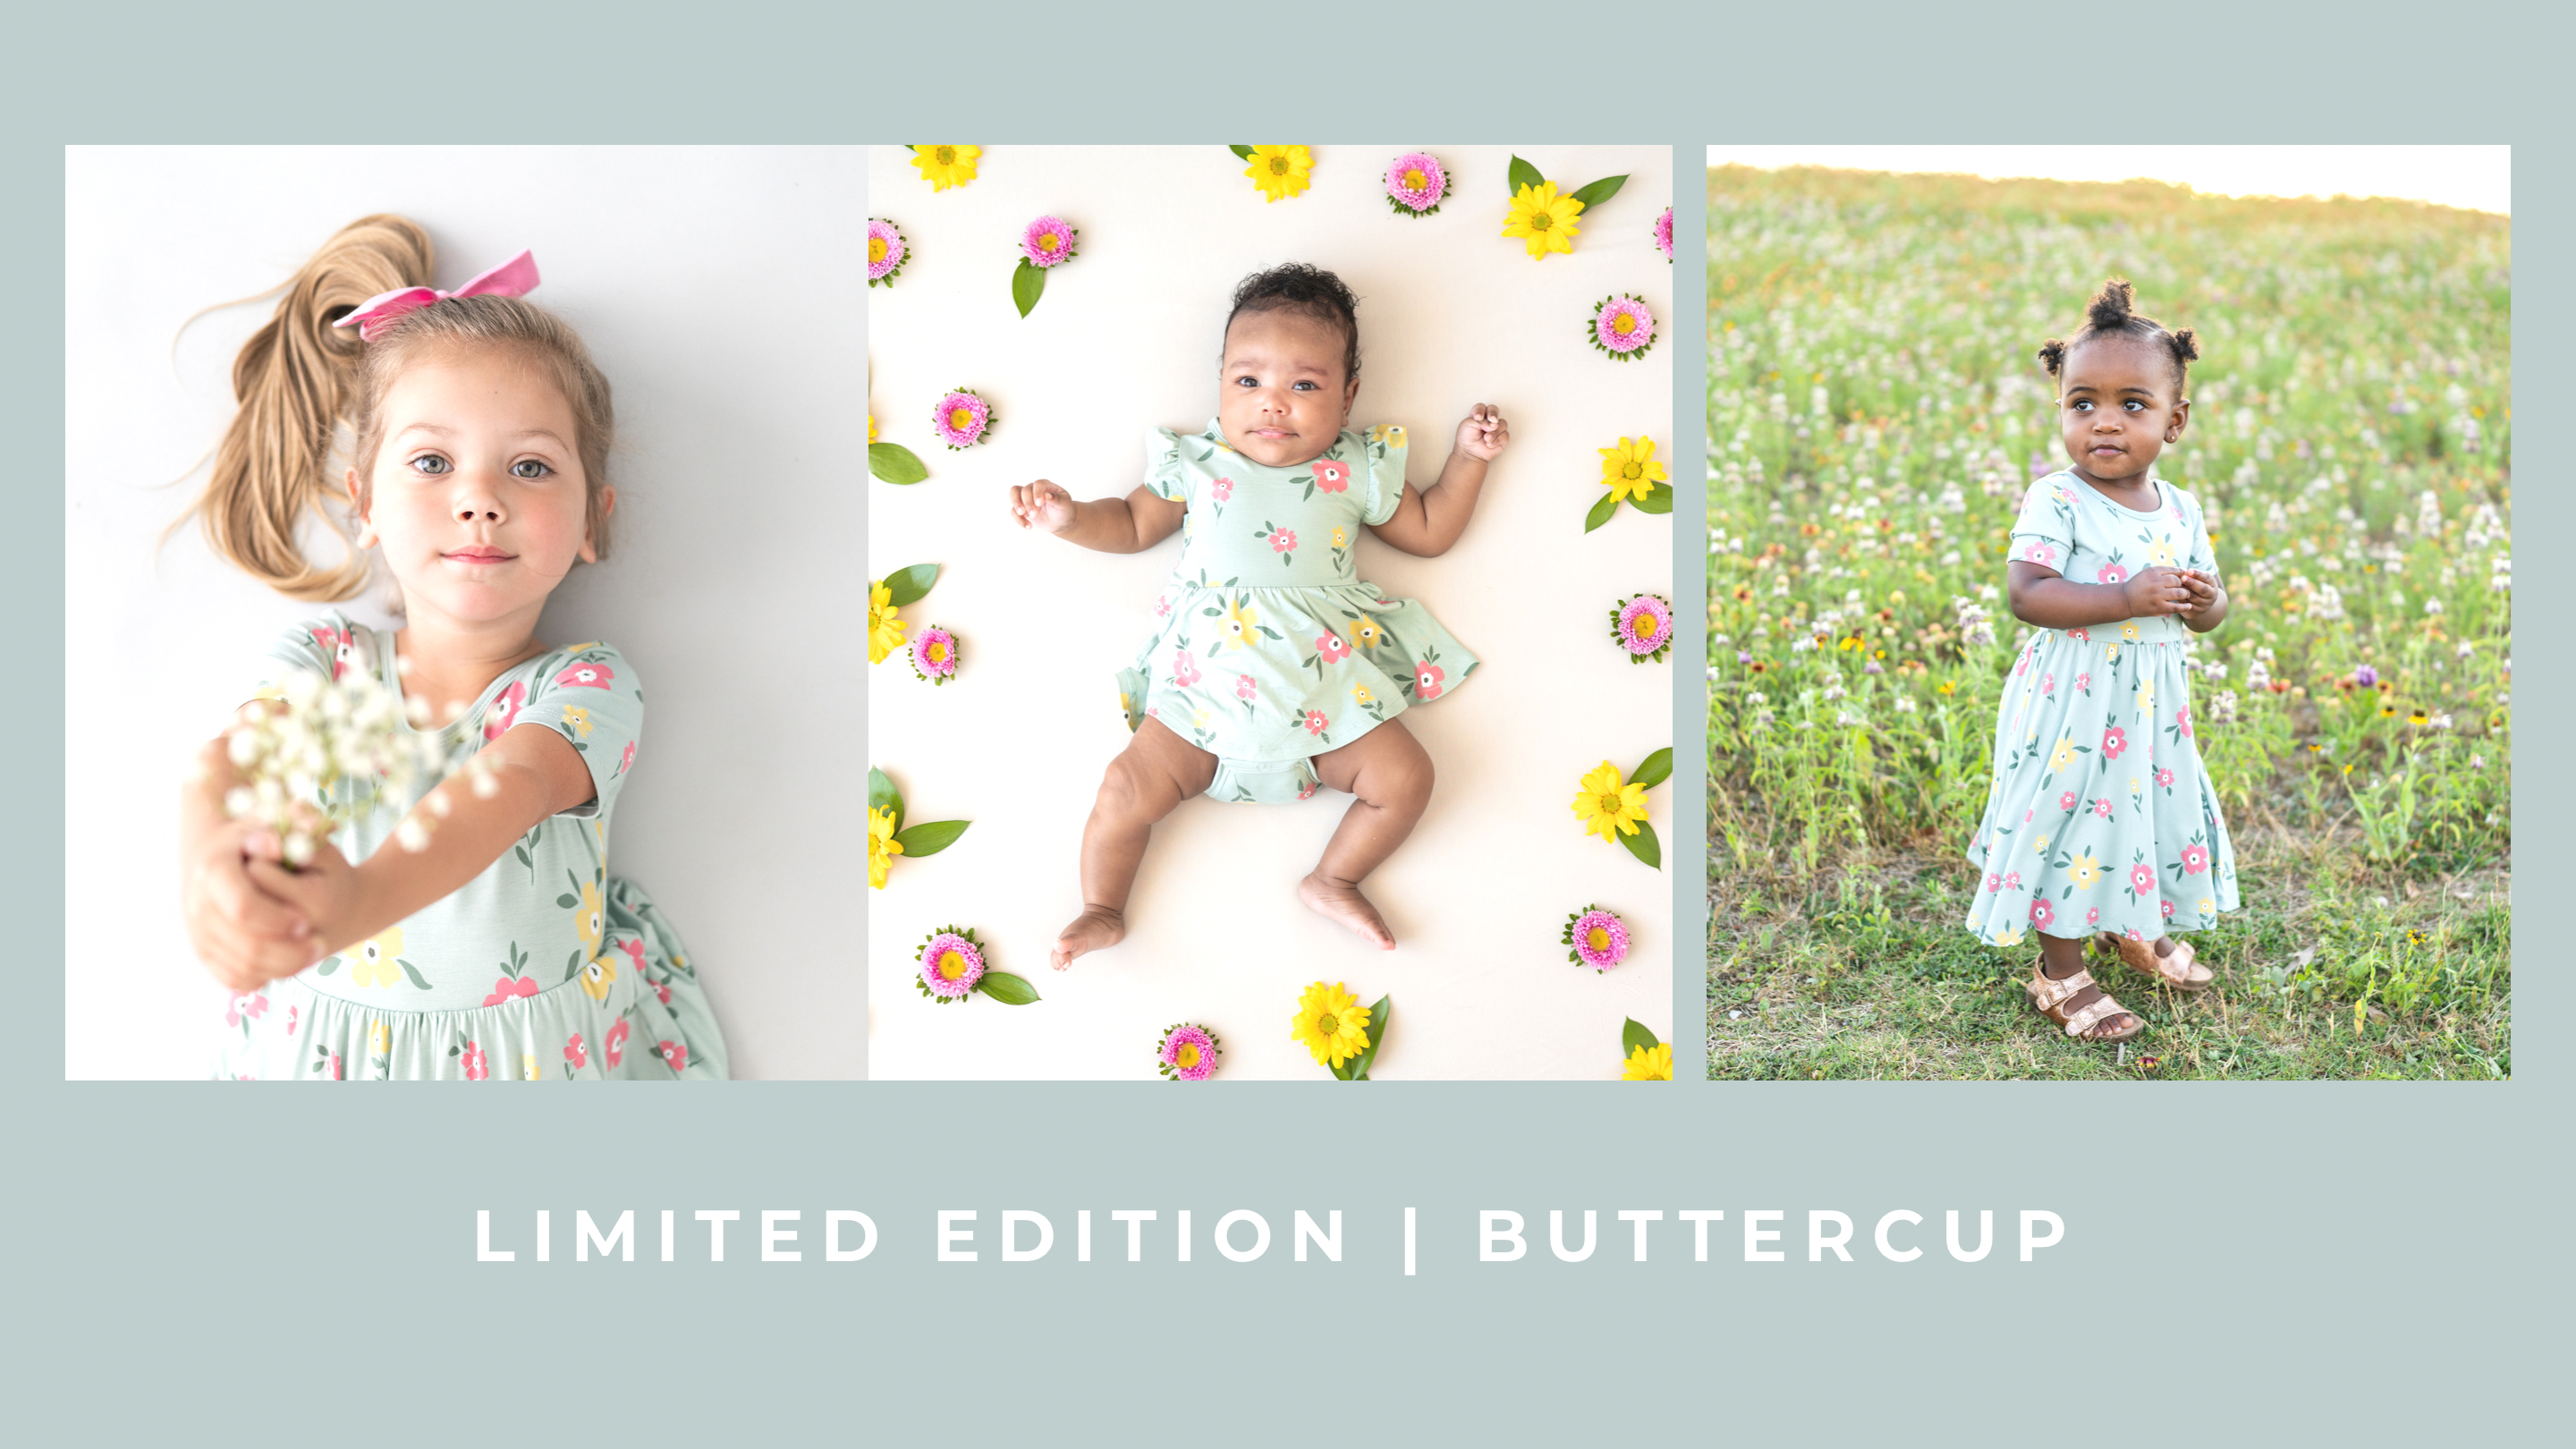 Limited Edition Buttercup